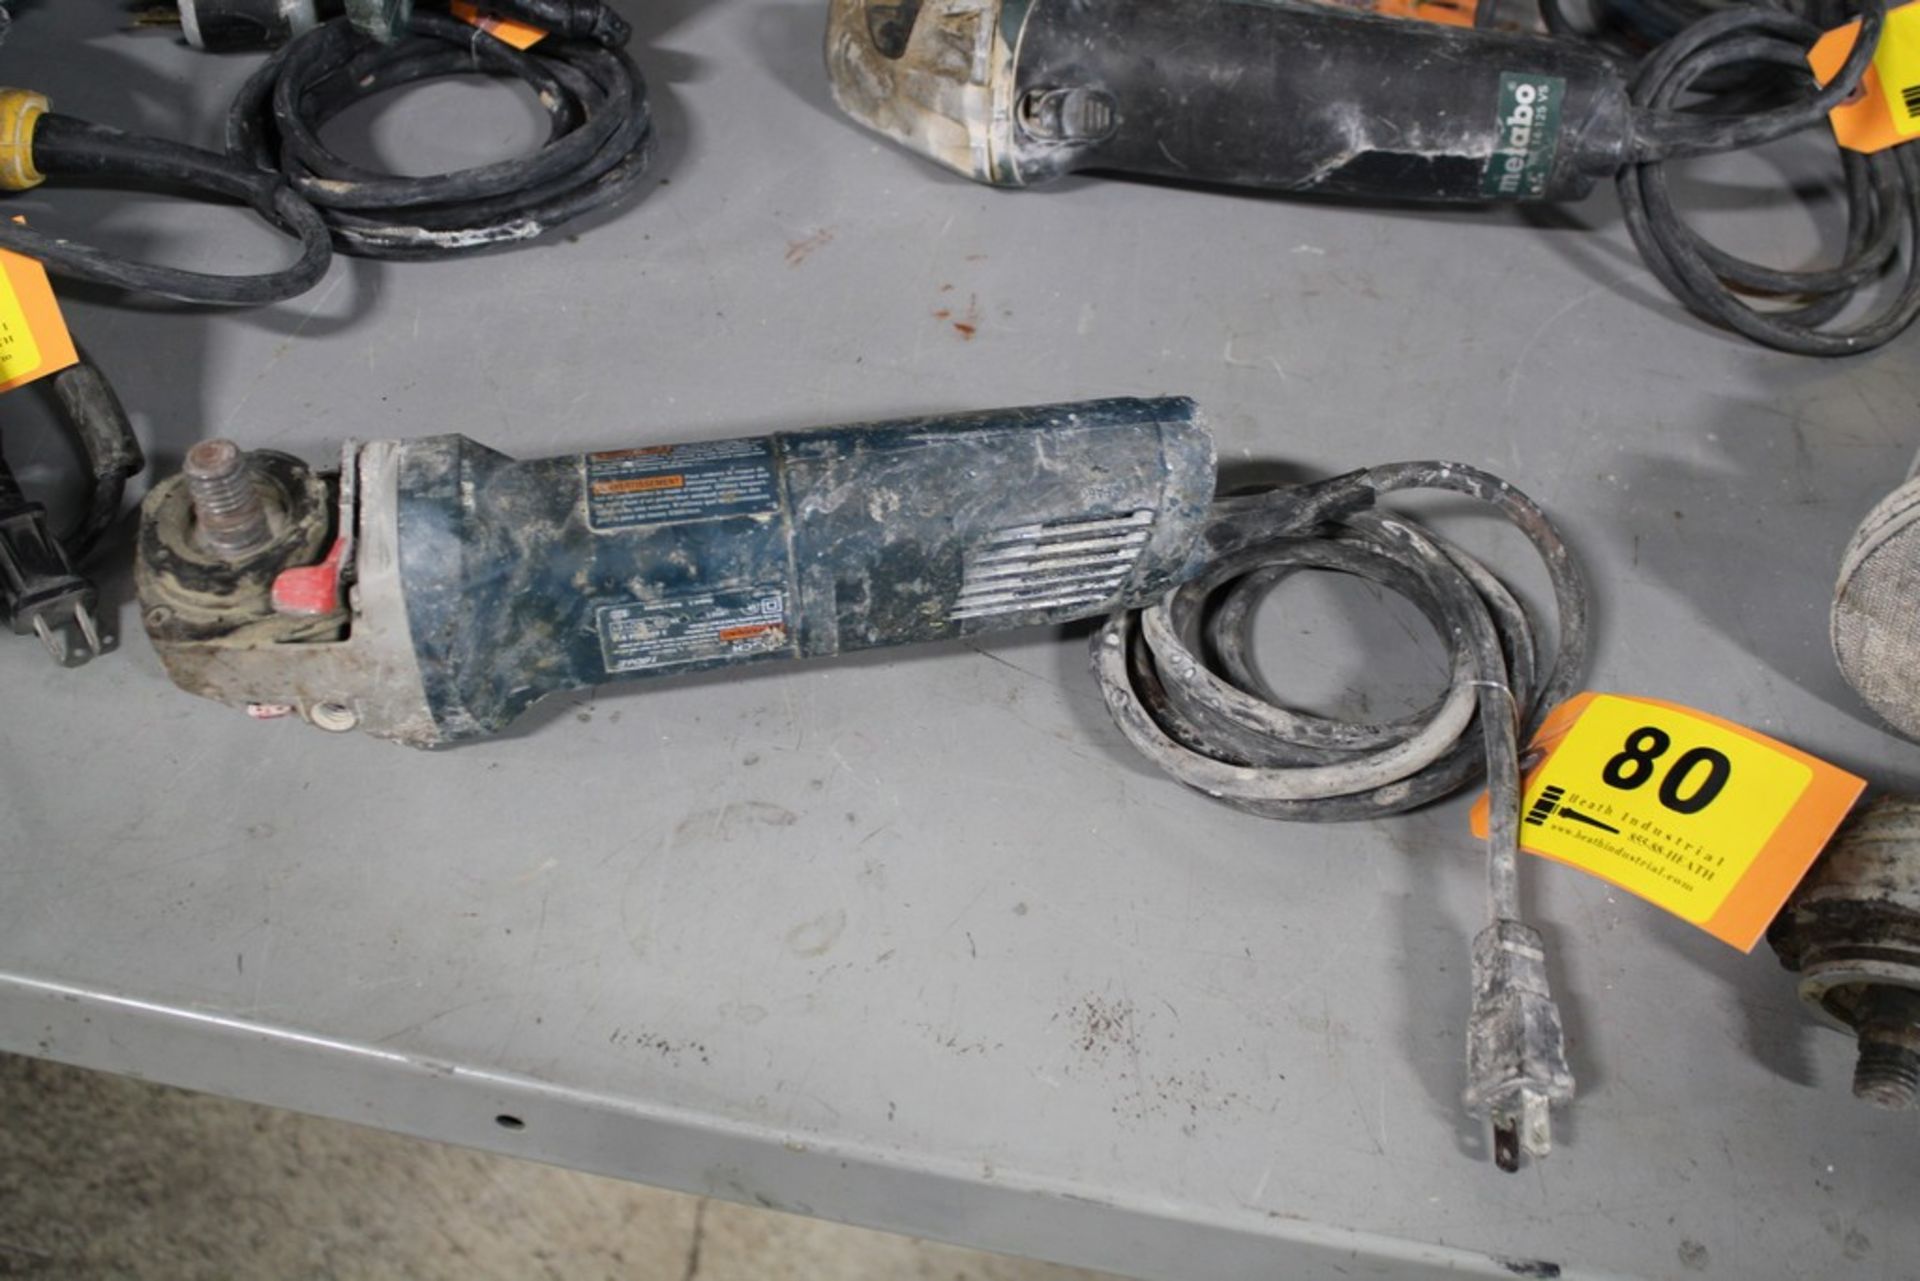 BOSCH ELECTRIC ANGLE GRINDER